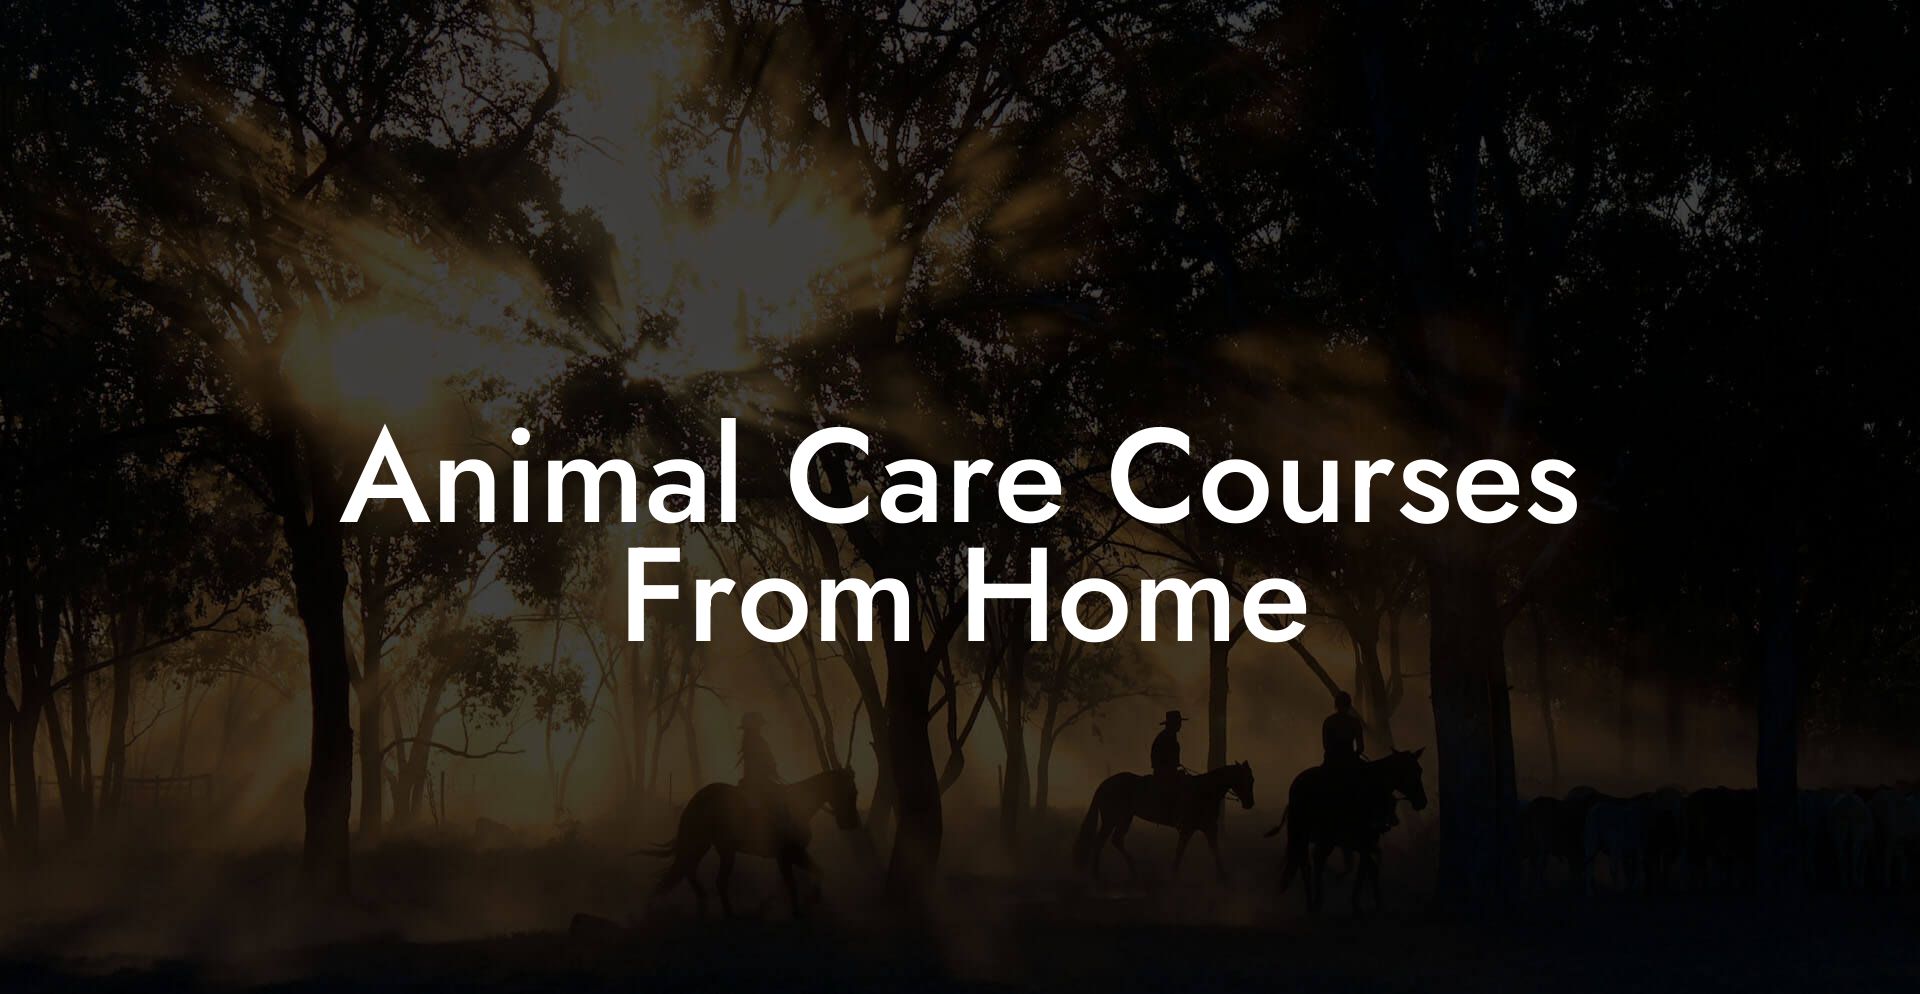 Animal Care Courses From Home